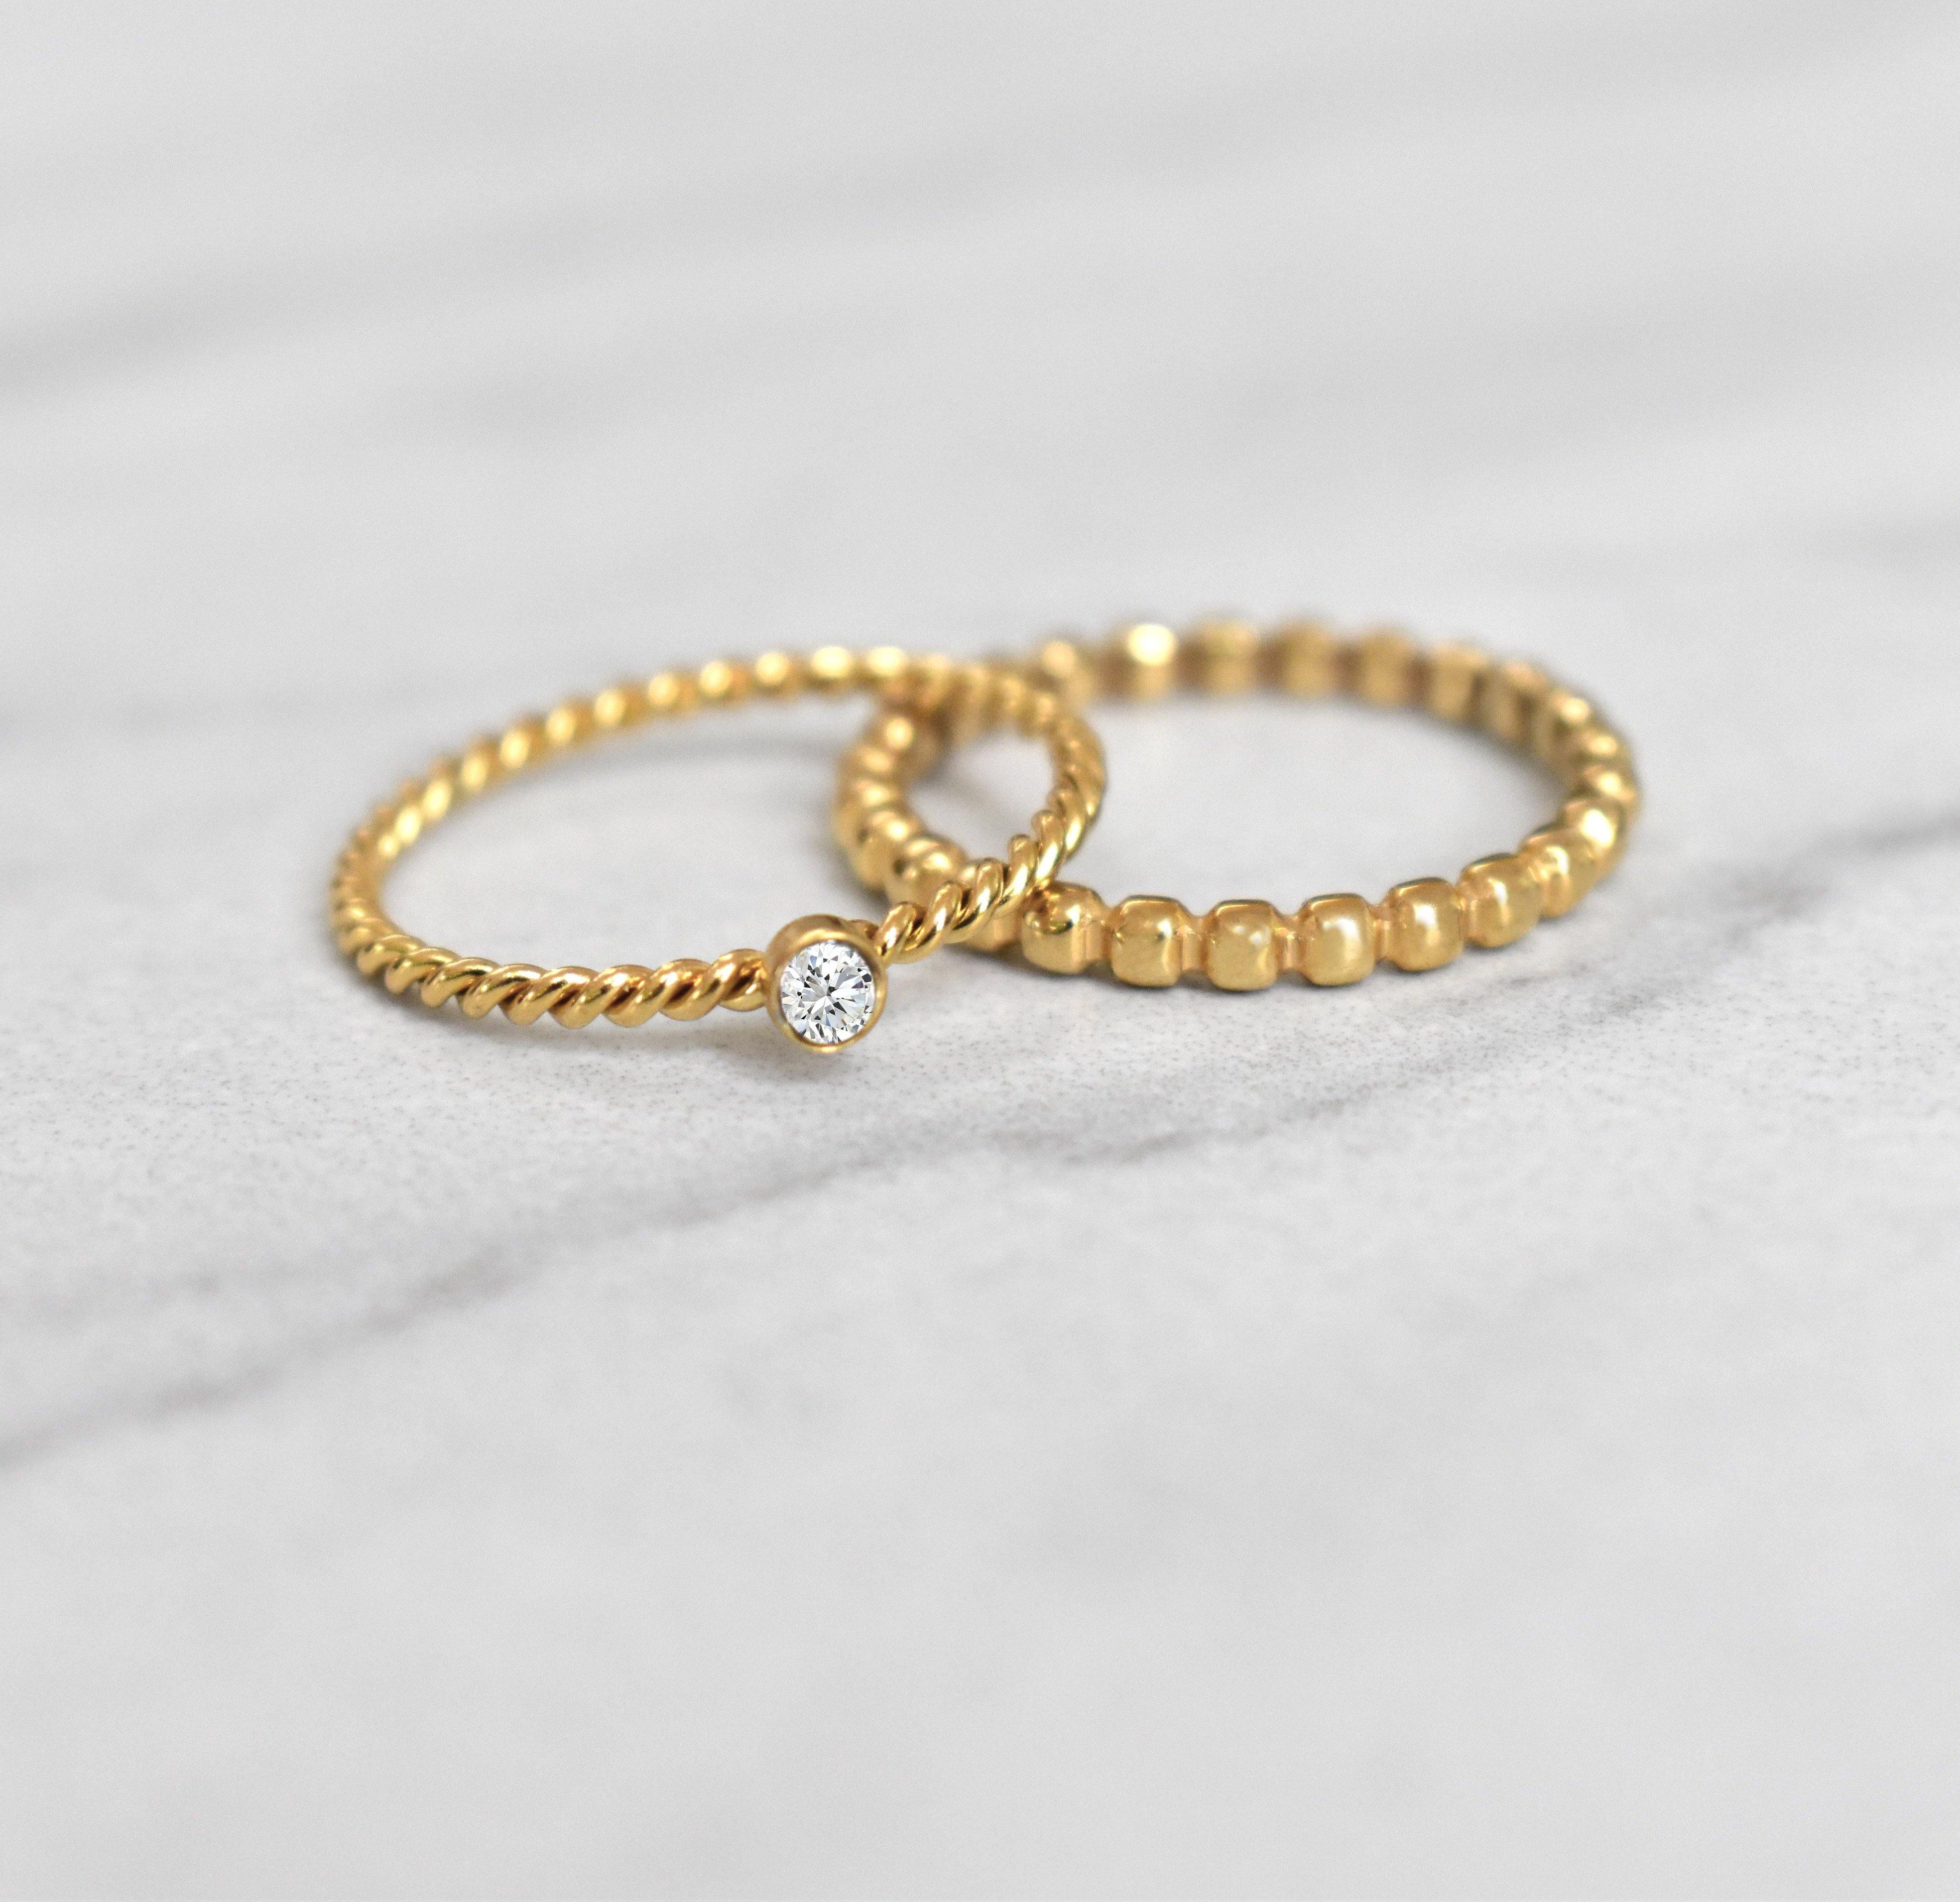 Jaina thin gold beaded ring paired with Dainty twist solitaire ring. Waterproof jewelry